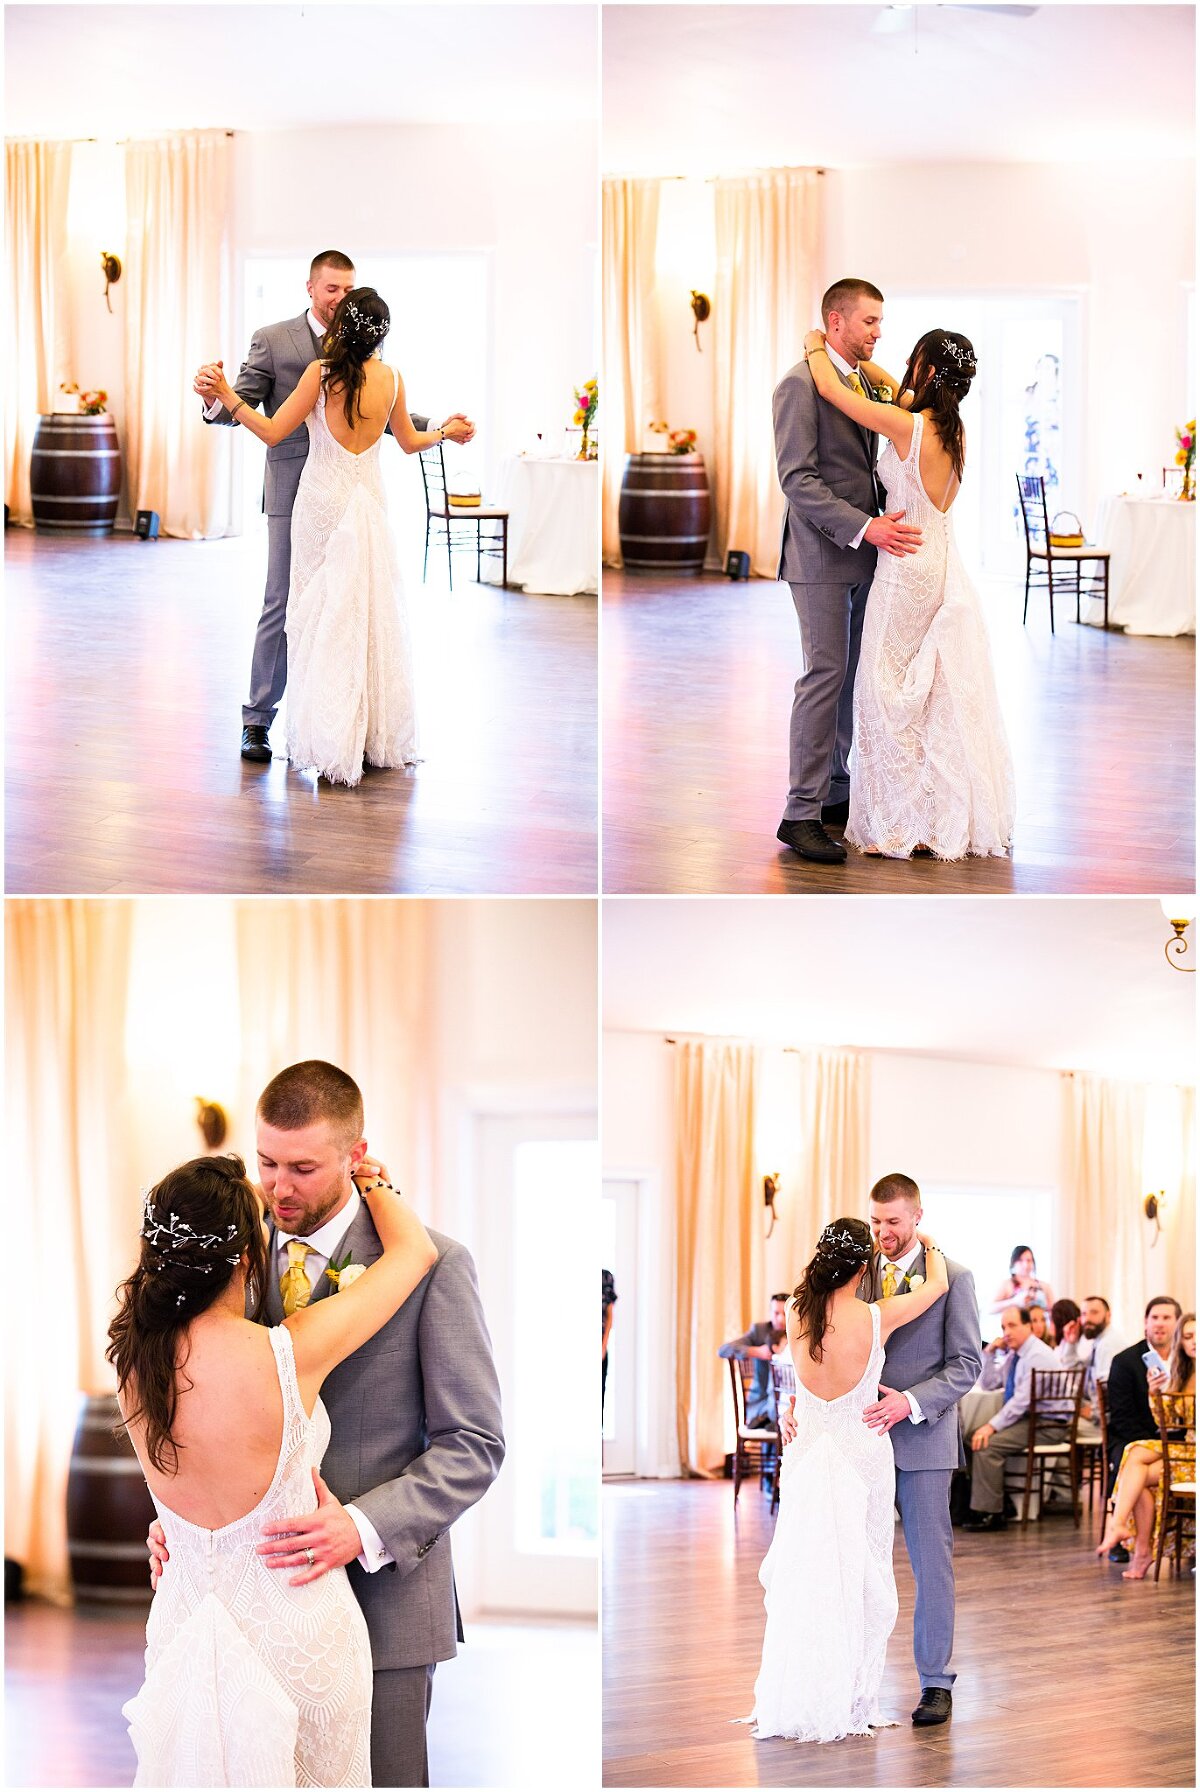 Jeff and Tammy’s SPRING WEDDING was filled with so many special moments from their families! It took place at the Harvest House at Lost Creek Winery. view the full wedding, click here:https://bethanievetter.com/the-harvest-house-at-lost-creek-winery-wedding-leesburg-virginia-tammy-jeff Photographed by Bethanie Vetter Photography LLC. #harvesthouse #theharvesthouseatlostcreek #winerywedding #virginiawedding #springwedding #aprilwedding #weddingphotos #weddingphotography